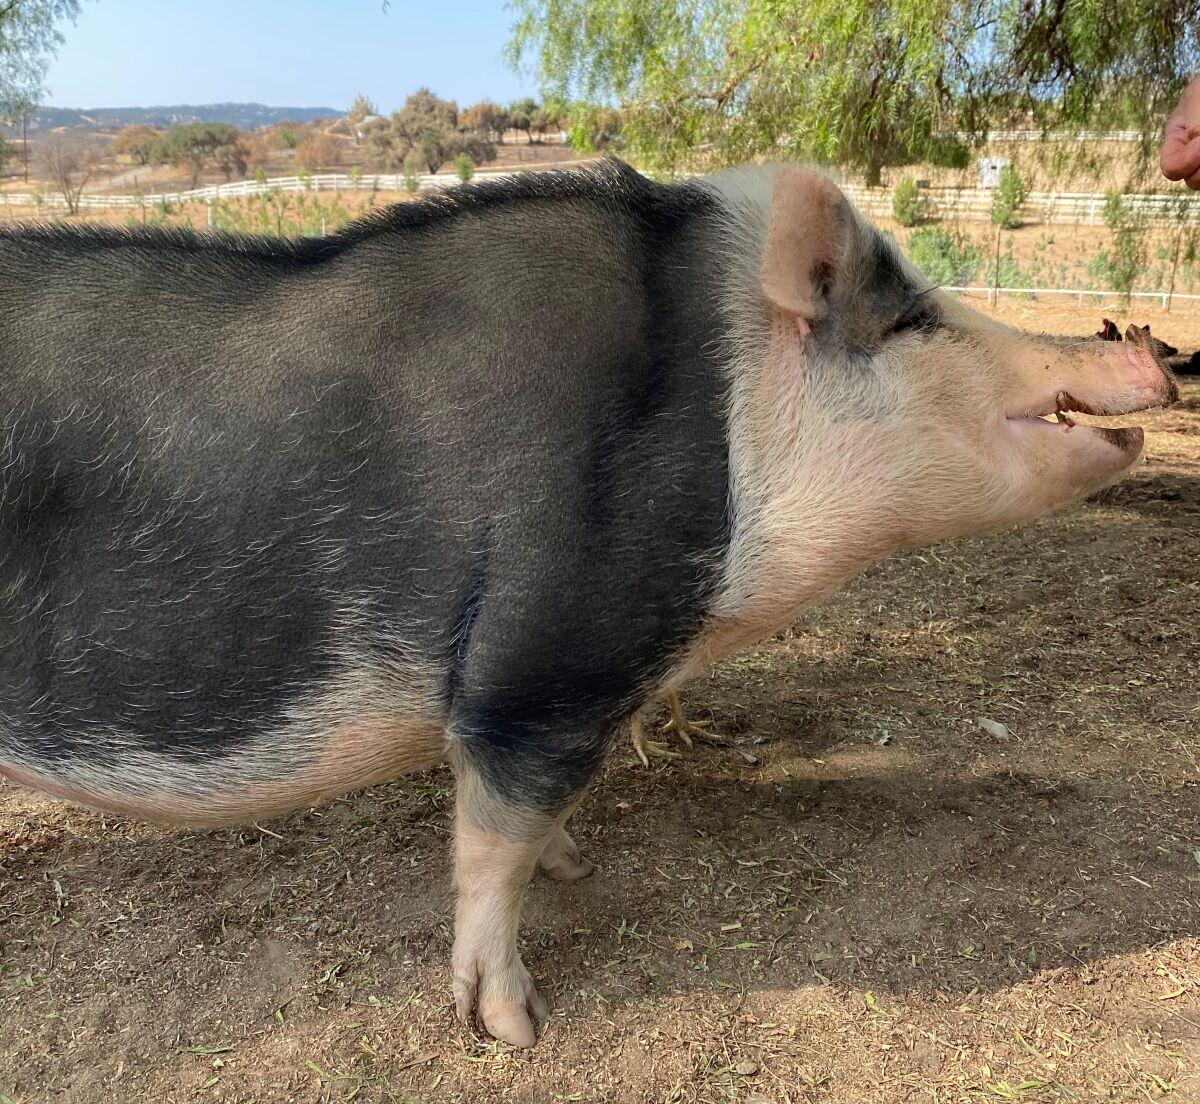 A side view of a pig that lives on a hemp farm